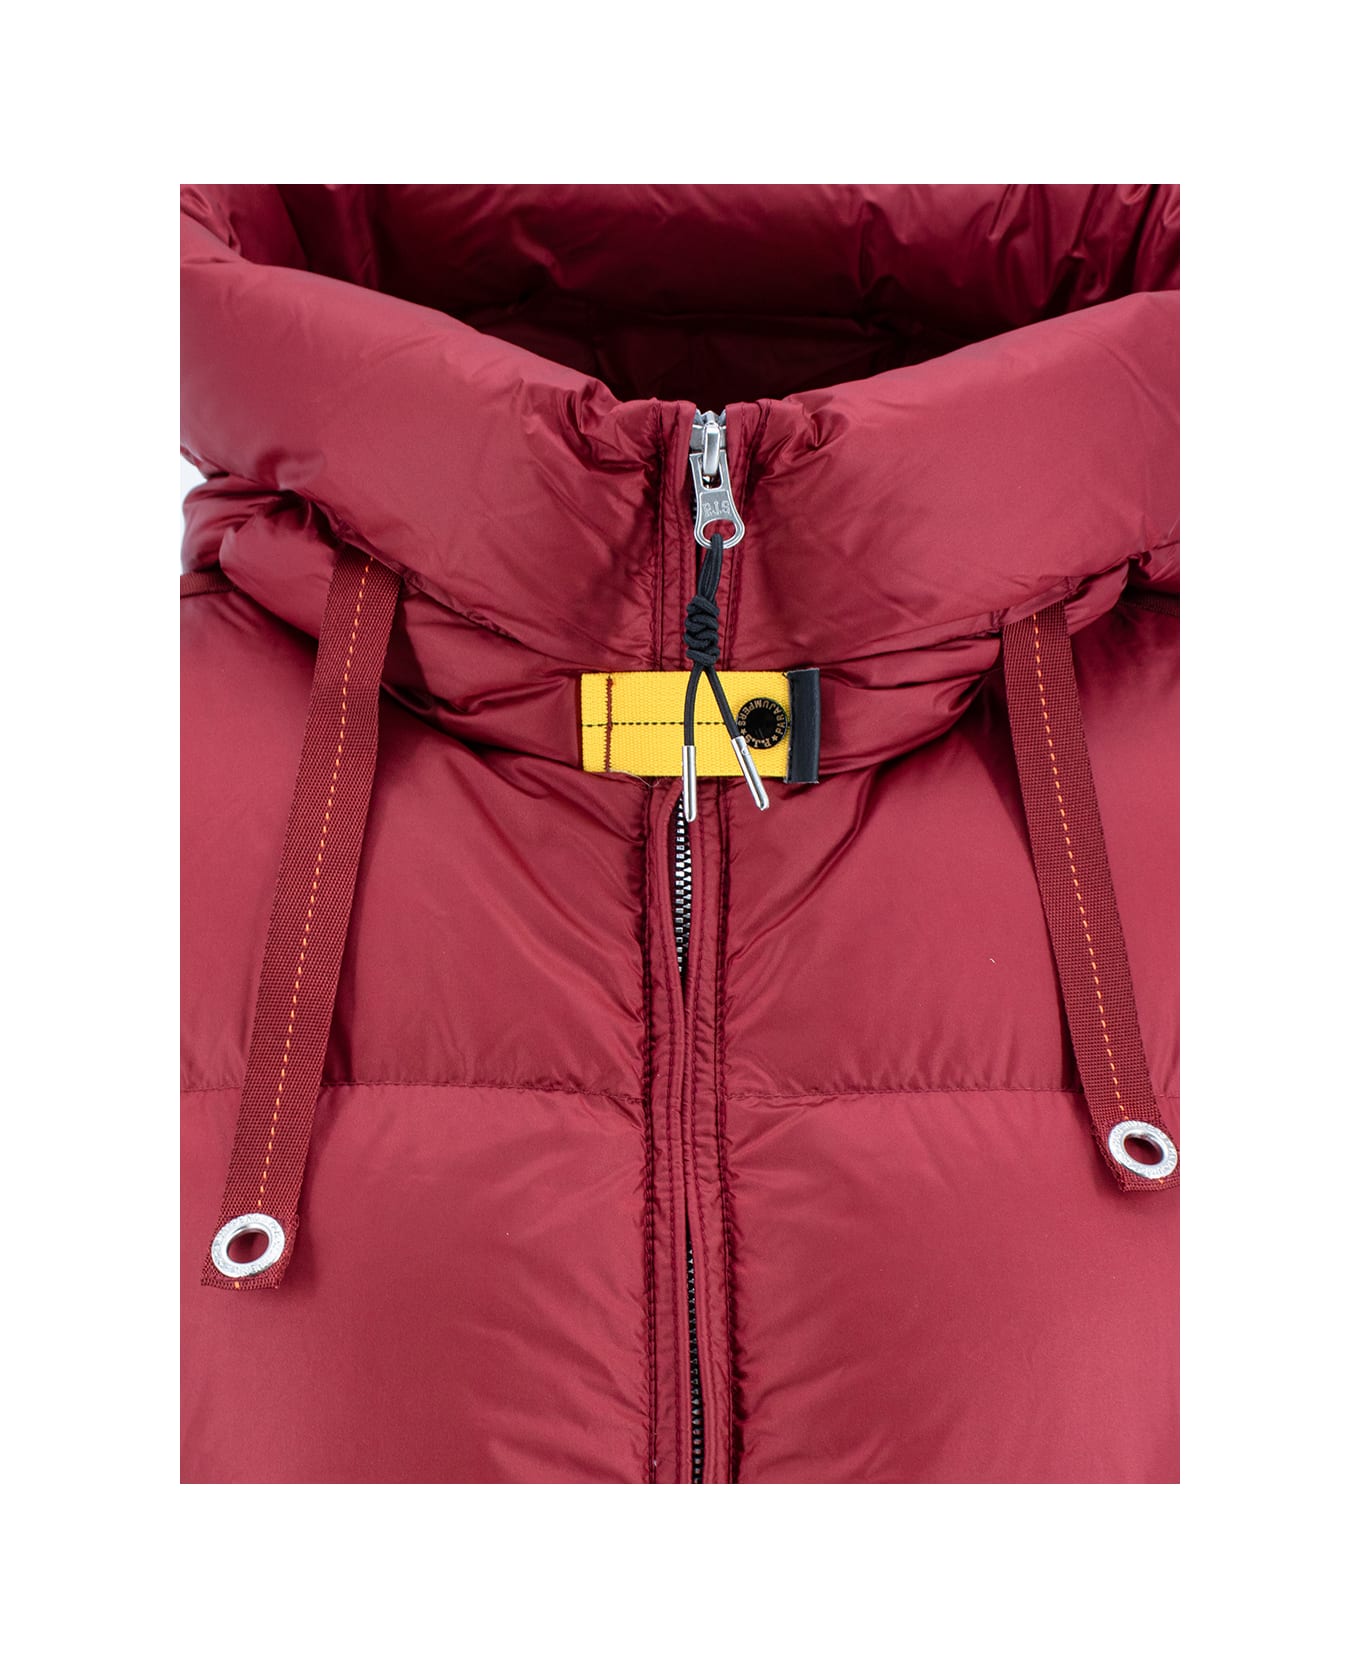 Parajumpers Down Waistcoat - RIO RED